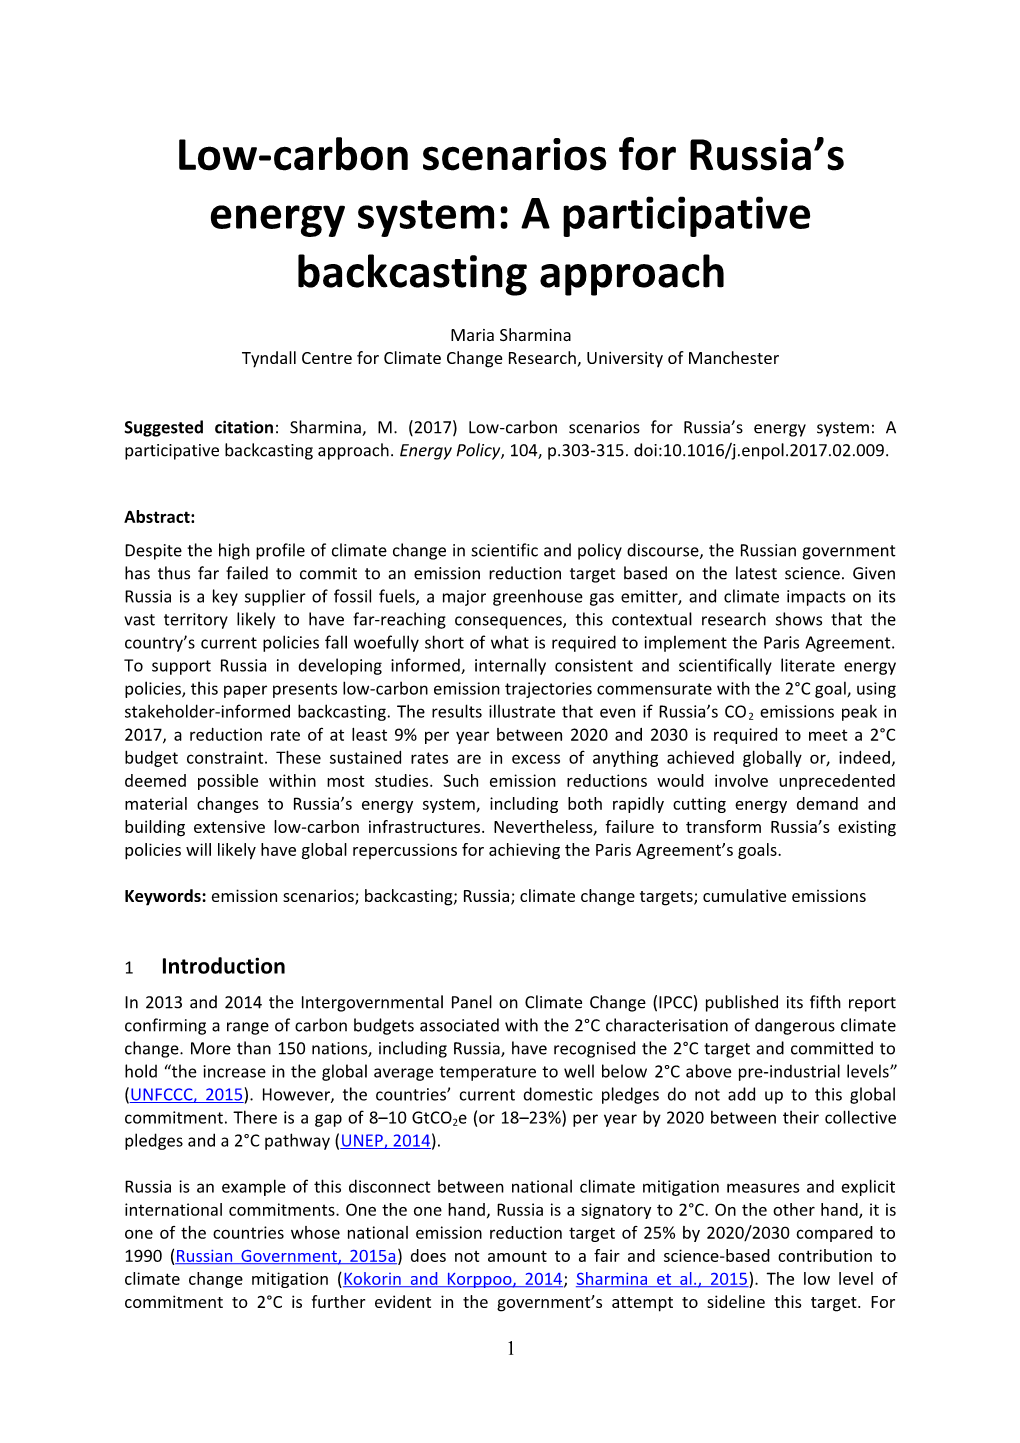 Low-Carbon Scenarios for Russia S Energy System: a Participative Backcasting Approach